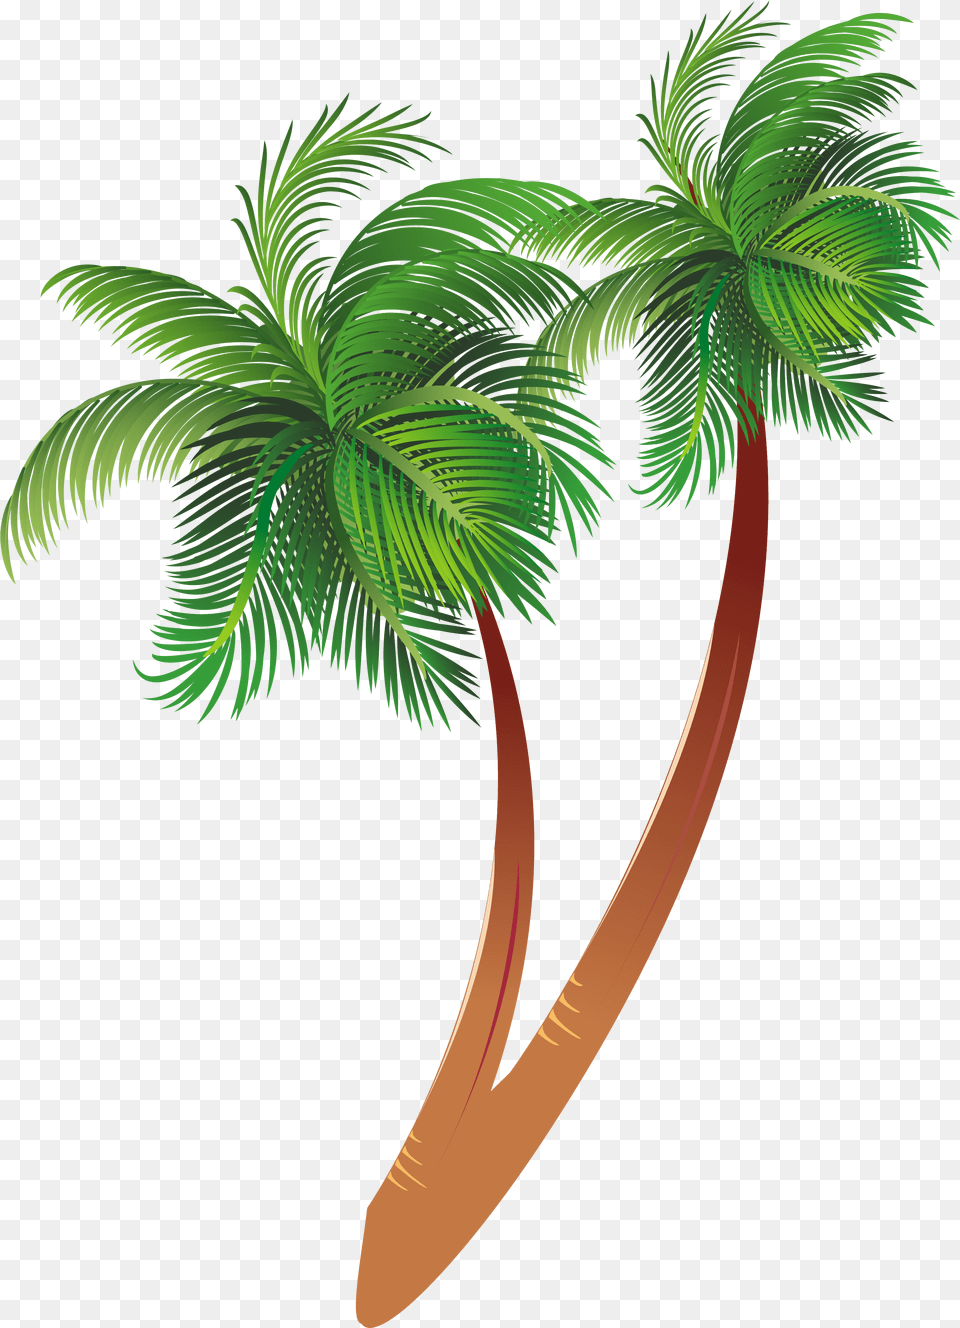 Download Cartoon Palm Tree Clipart Coconut Palm Background Coconut Tree Clipart Png